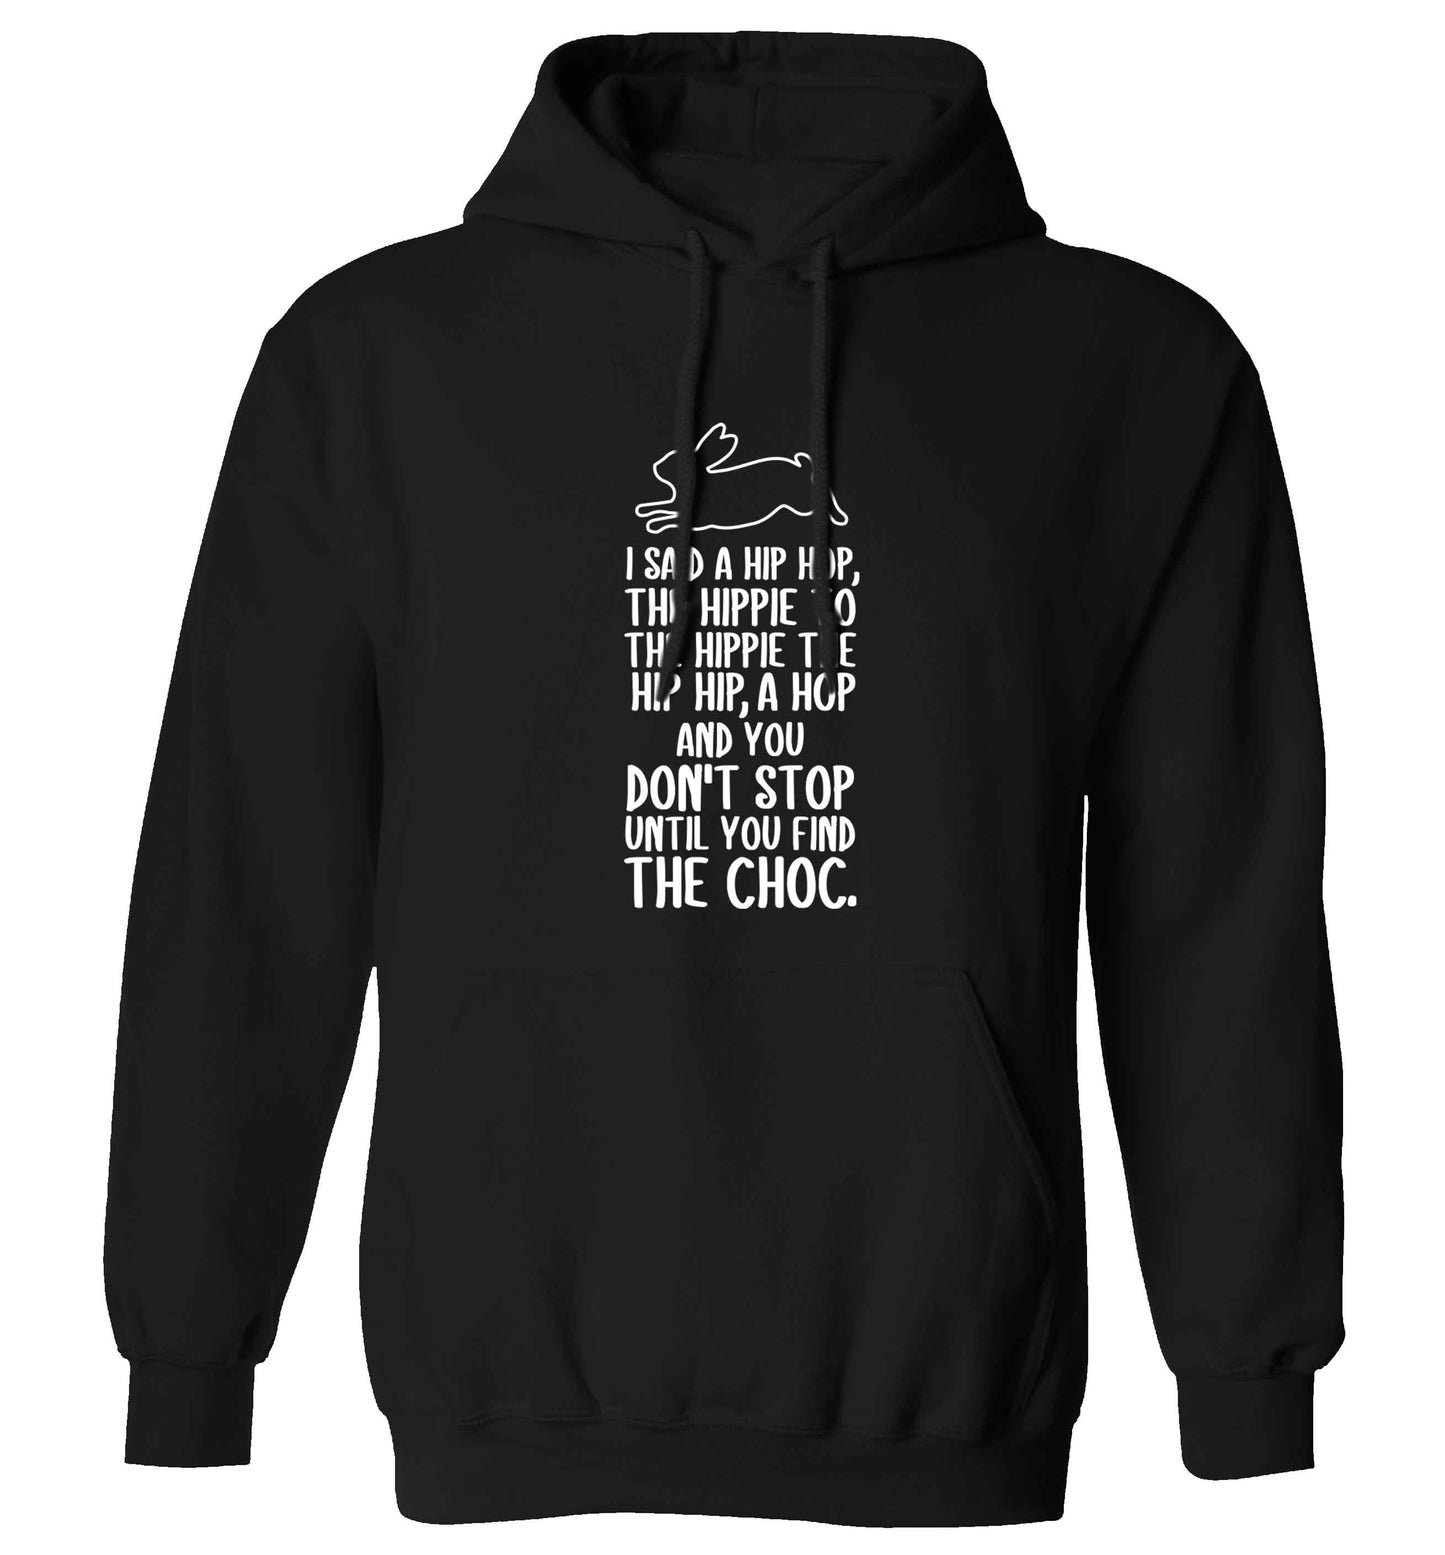 Don't stop until you find the choc adults unisex black hoodie 2XL